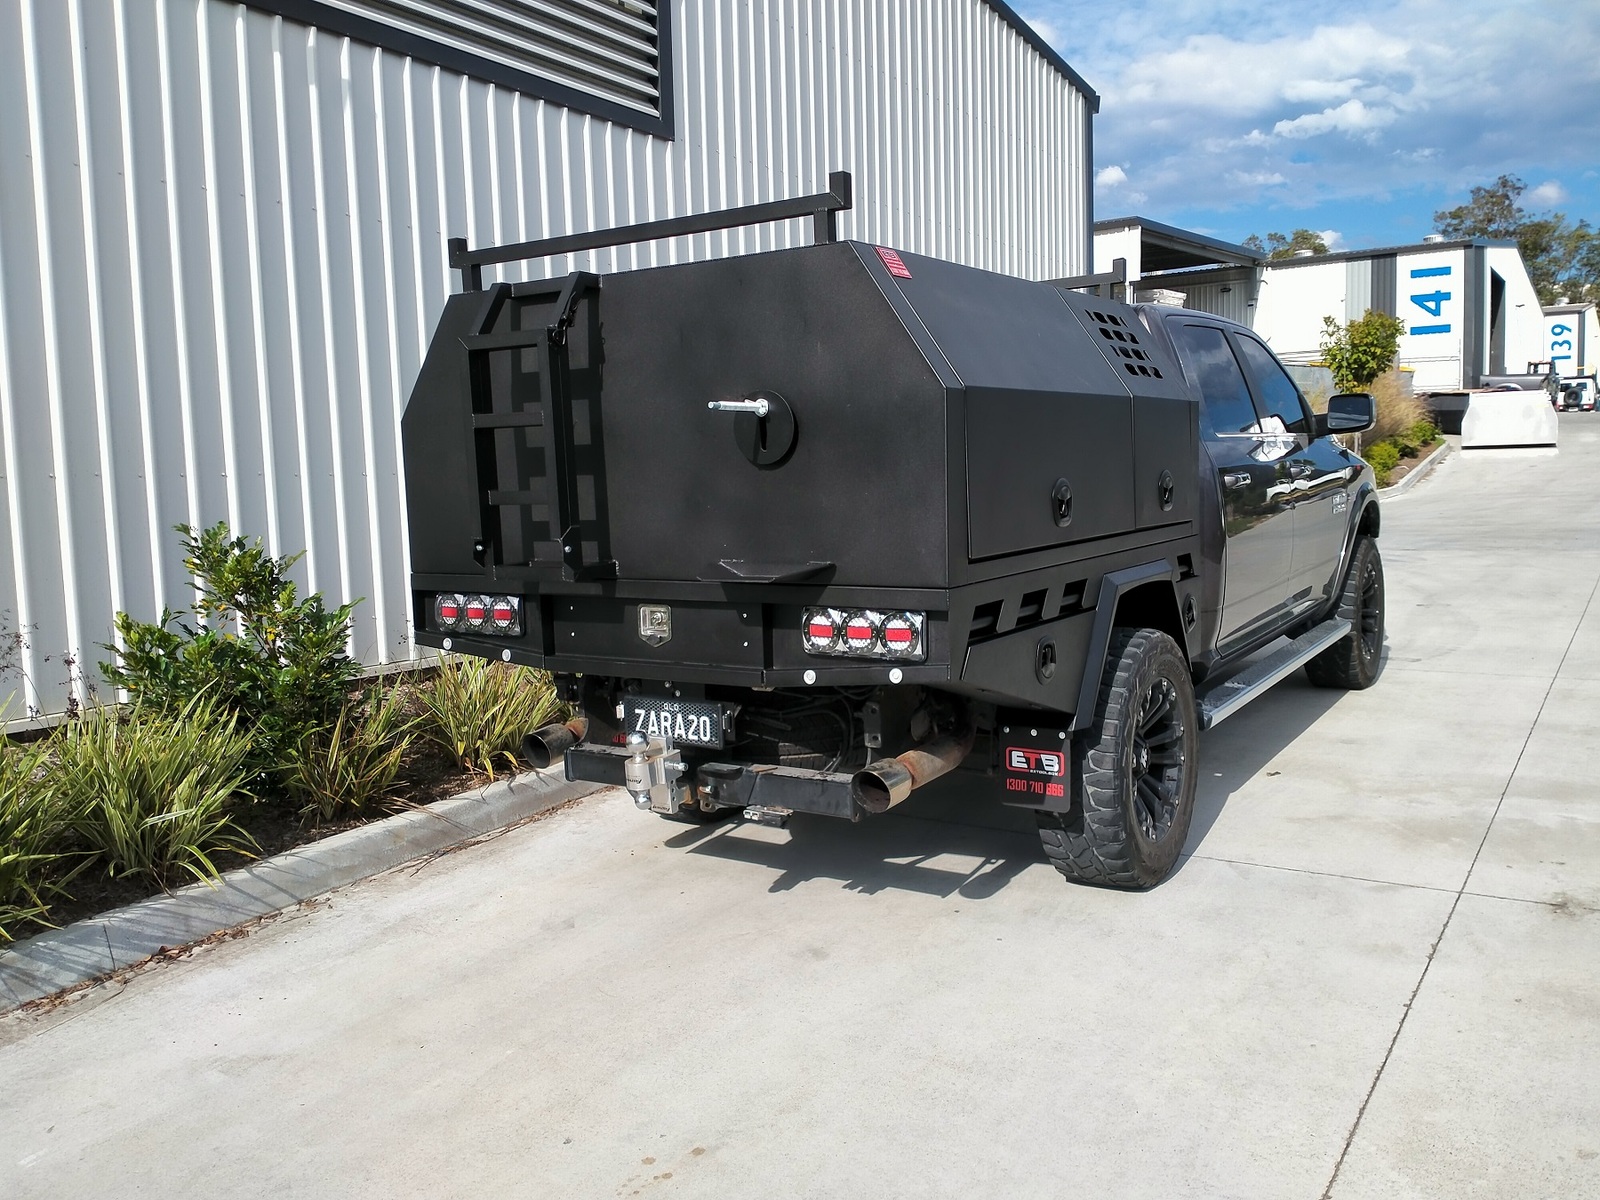 Ram 1500 Ute Tray and Canopy Package